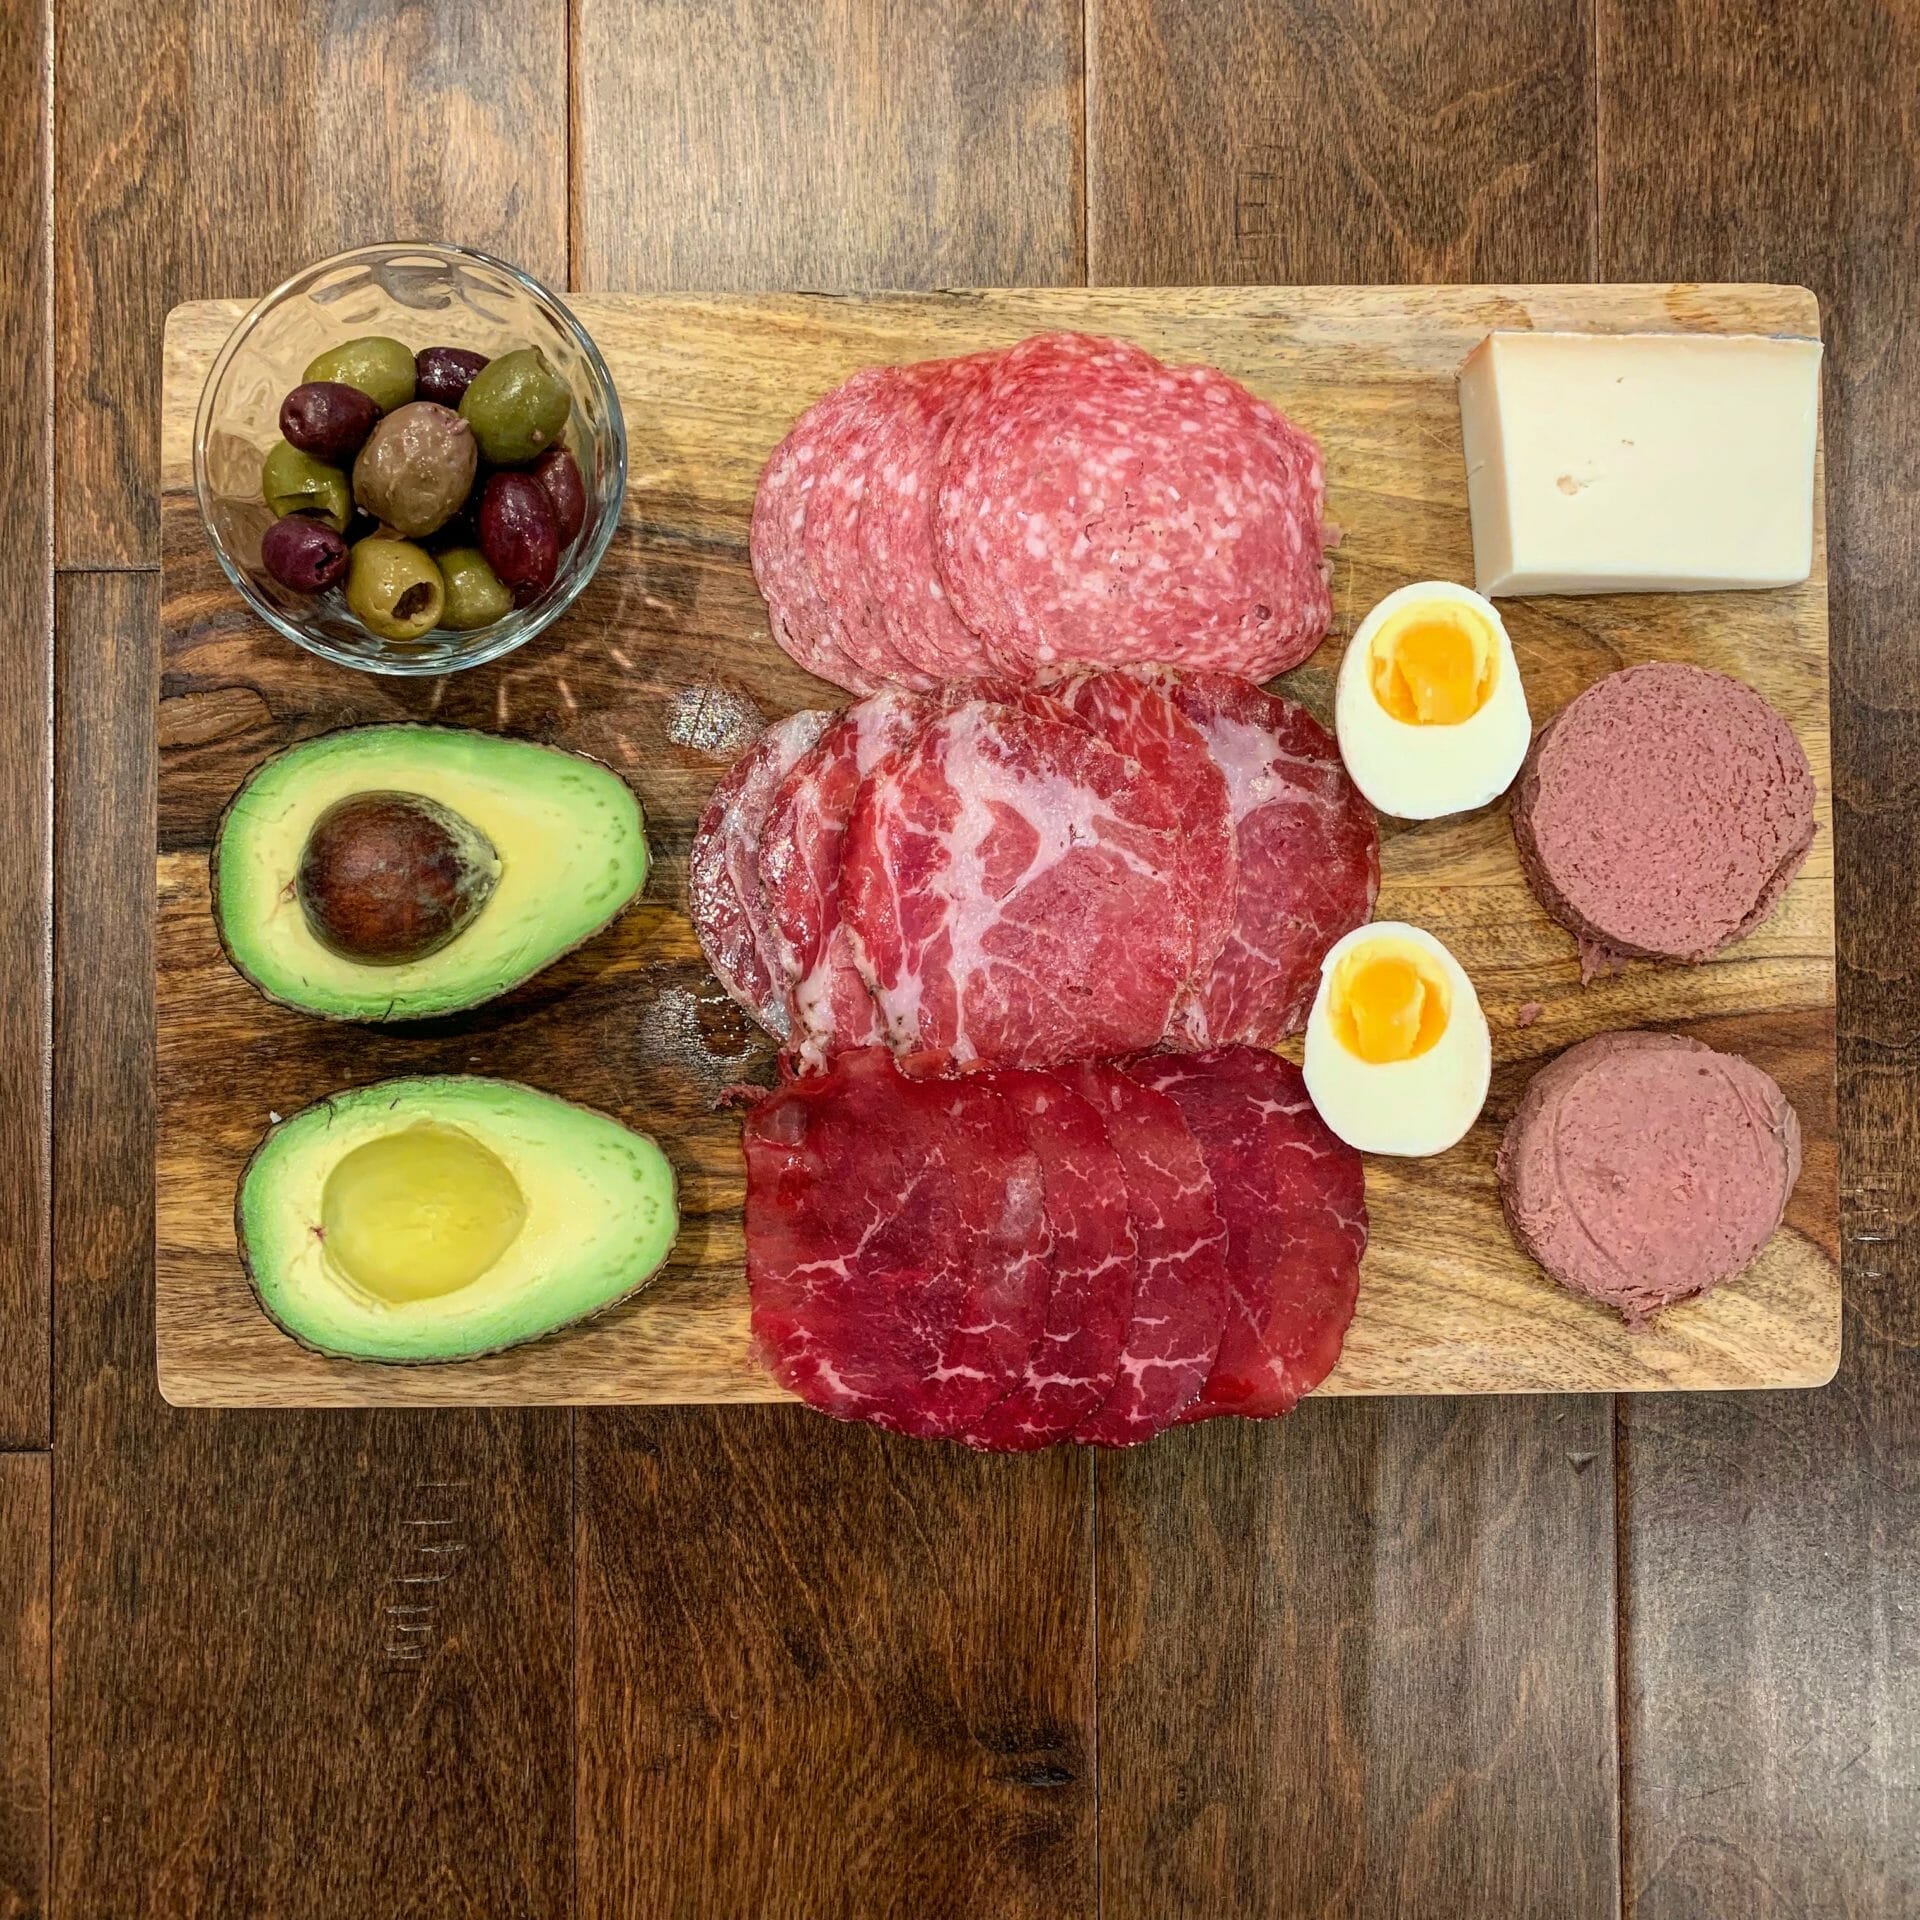 Dinner plate with uncured cold cuts, avocado, olives, goat cheese, boiled egg and pastured liverwurst